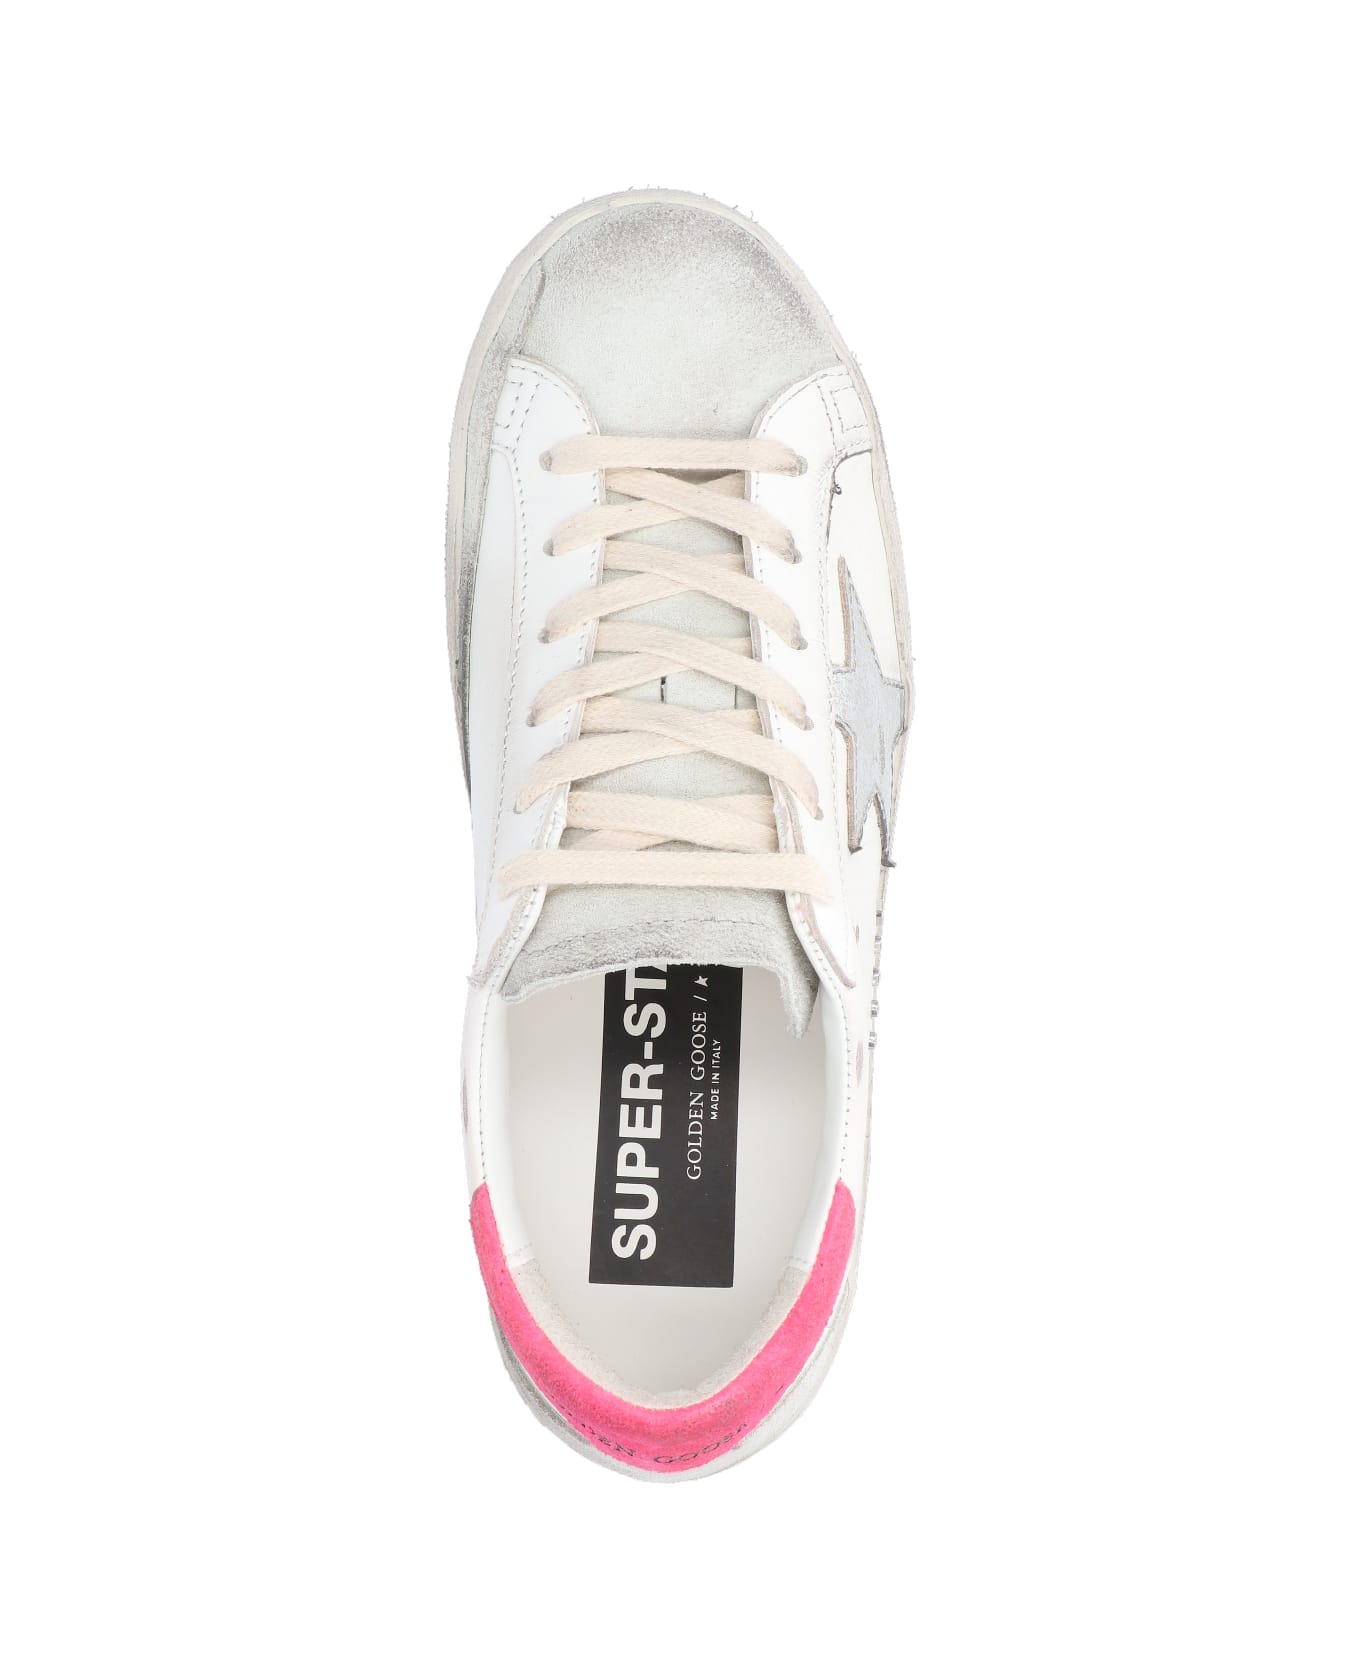 Golden Goose Superstar Classic Sneakers - WHITE/ICE